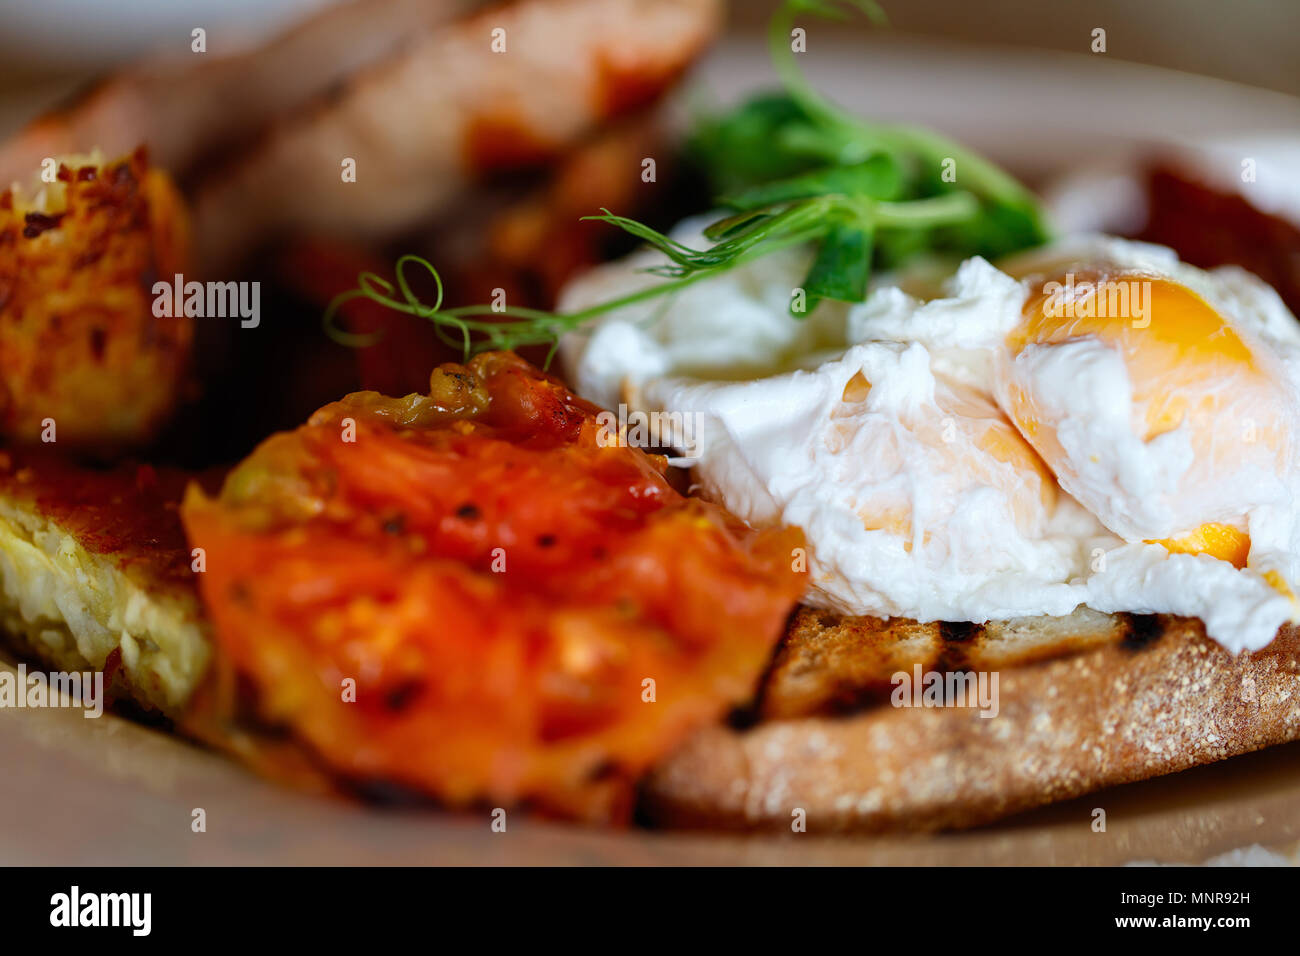 Delicious breakfast with fried eggs, bacon and vegetables Stock Photo